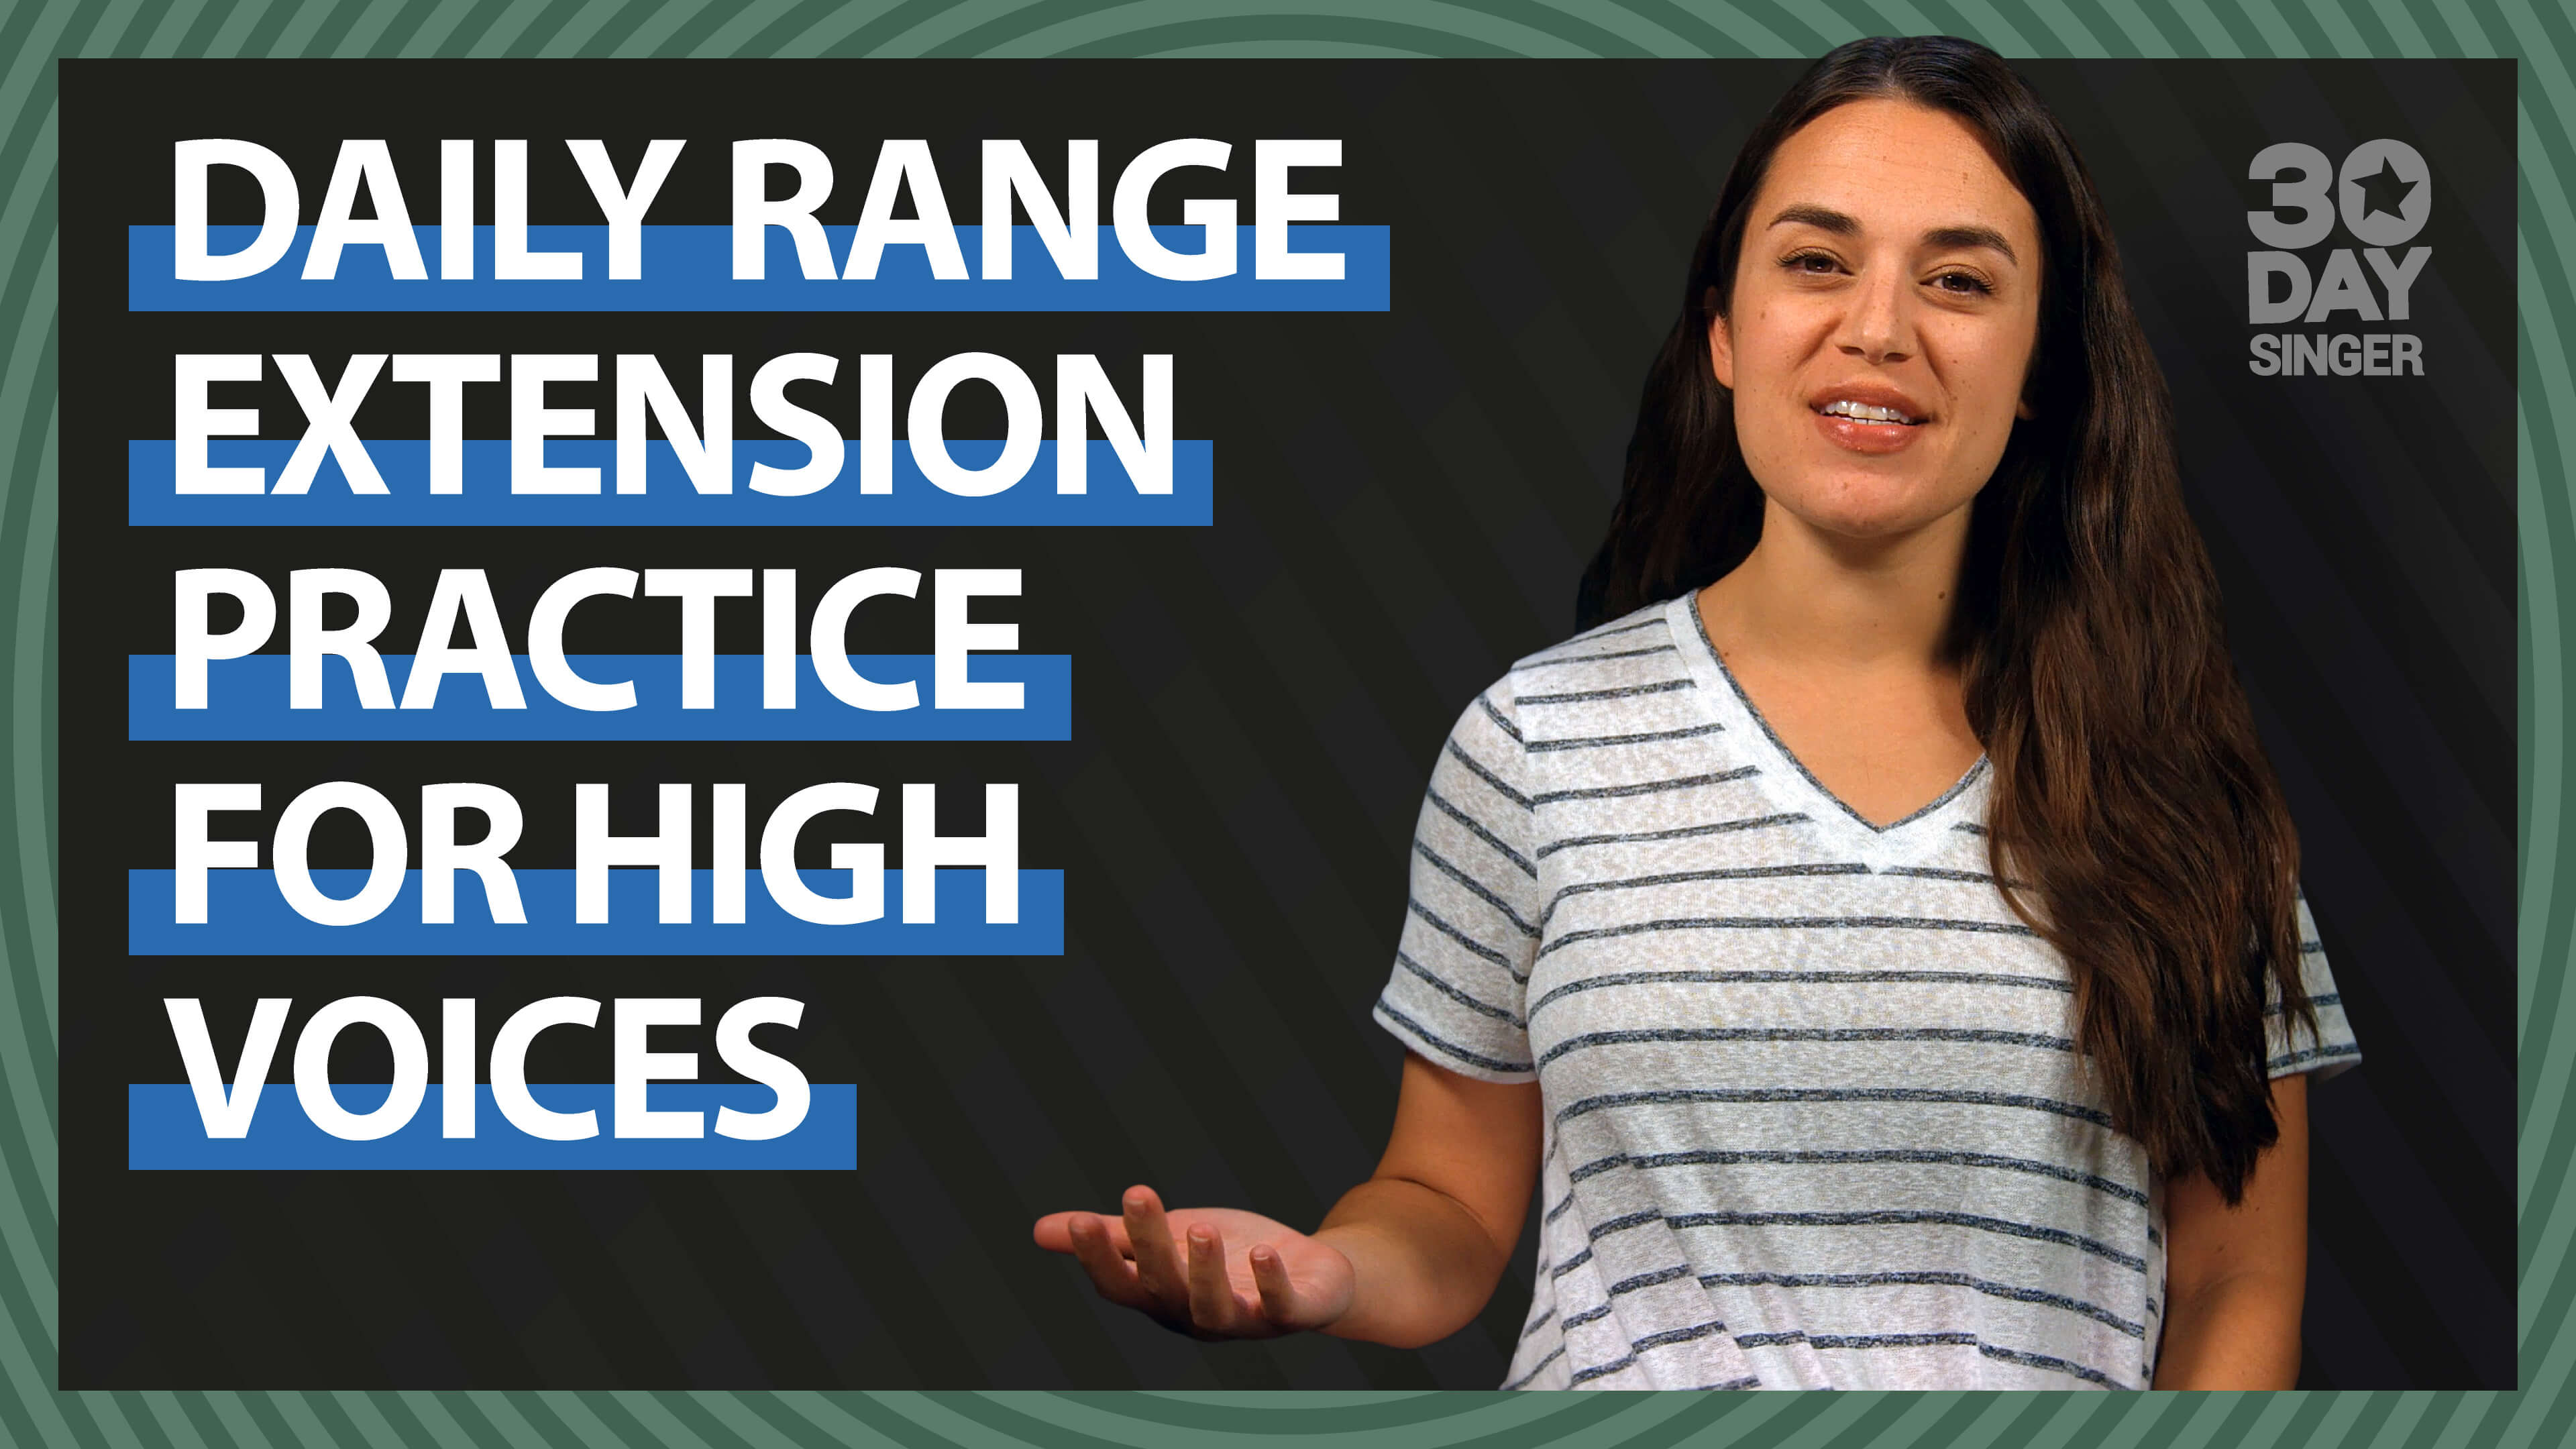 Daily Range Extension Practice For High Voices